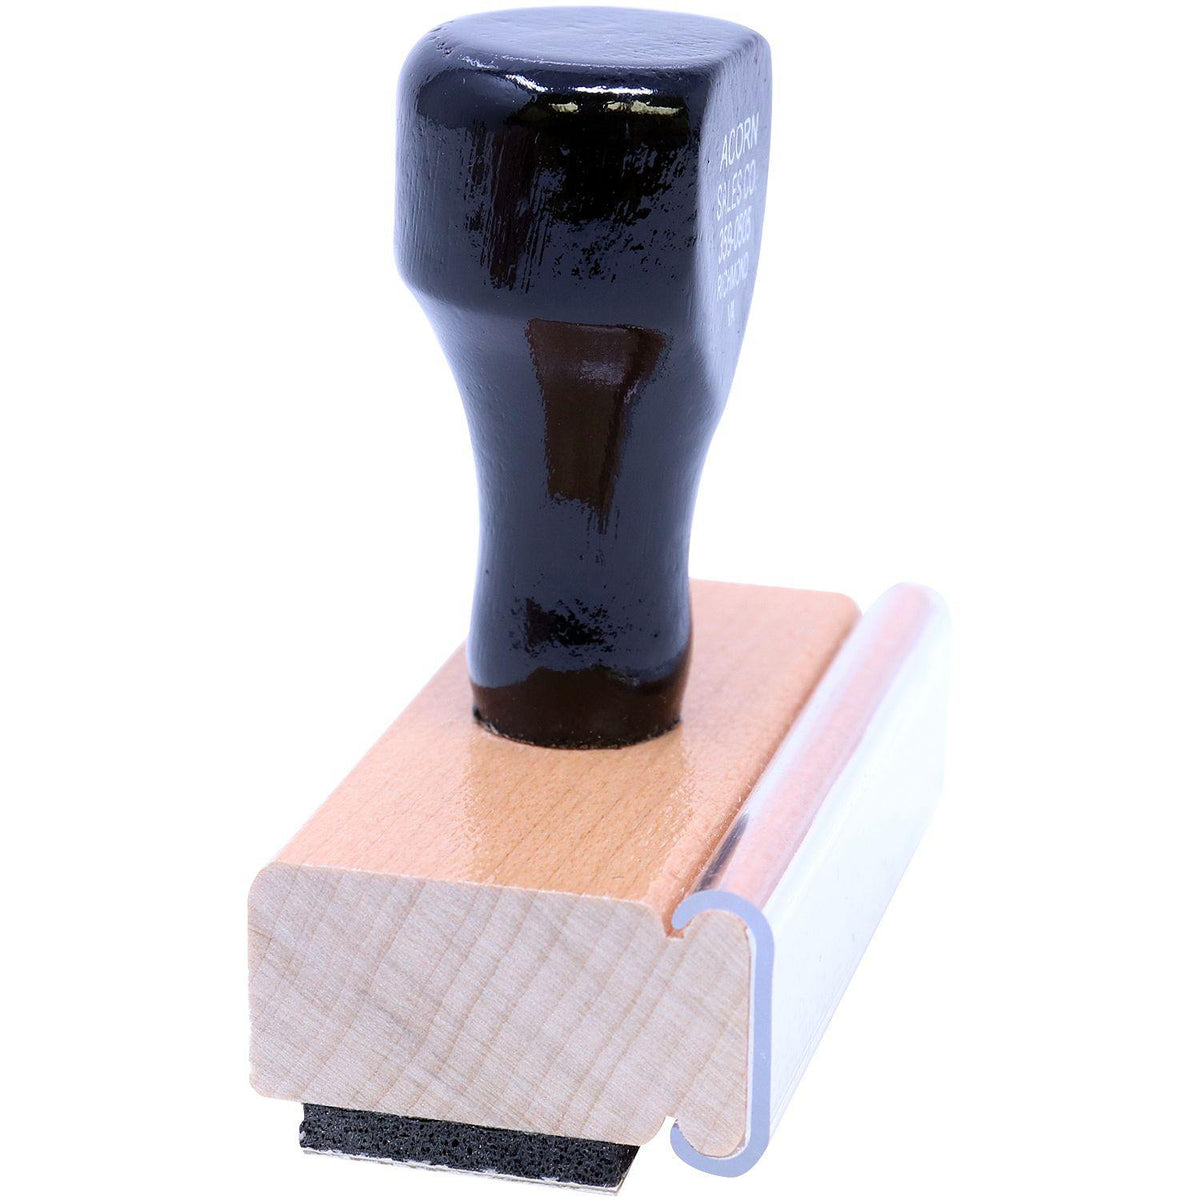 Large You Insurance has Paid their portion Rubber Stamp - Engineer Seal Stamps - Brand_Acorn, Impression Size_Large, Stamp Type_Regular Stamp, Type of Use_Finance, Type of Use_Medical